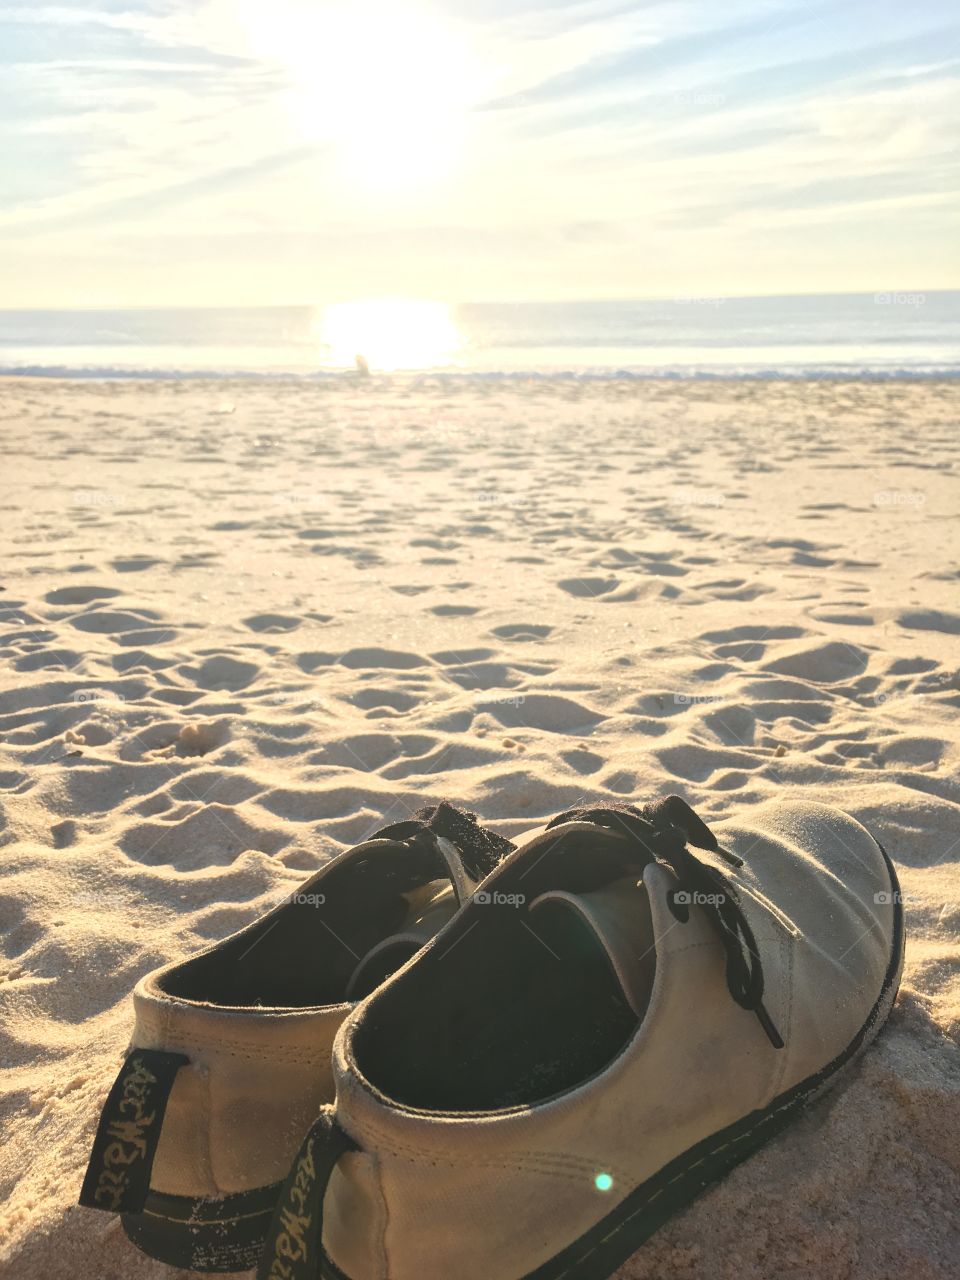 shoes & sand 